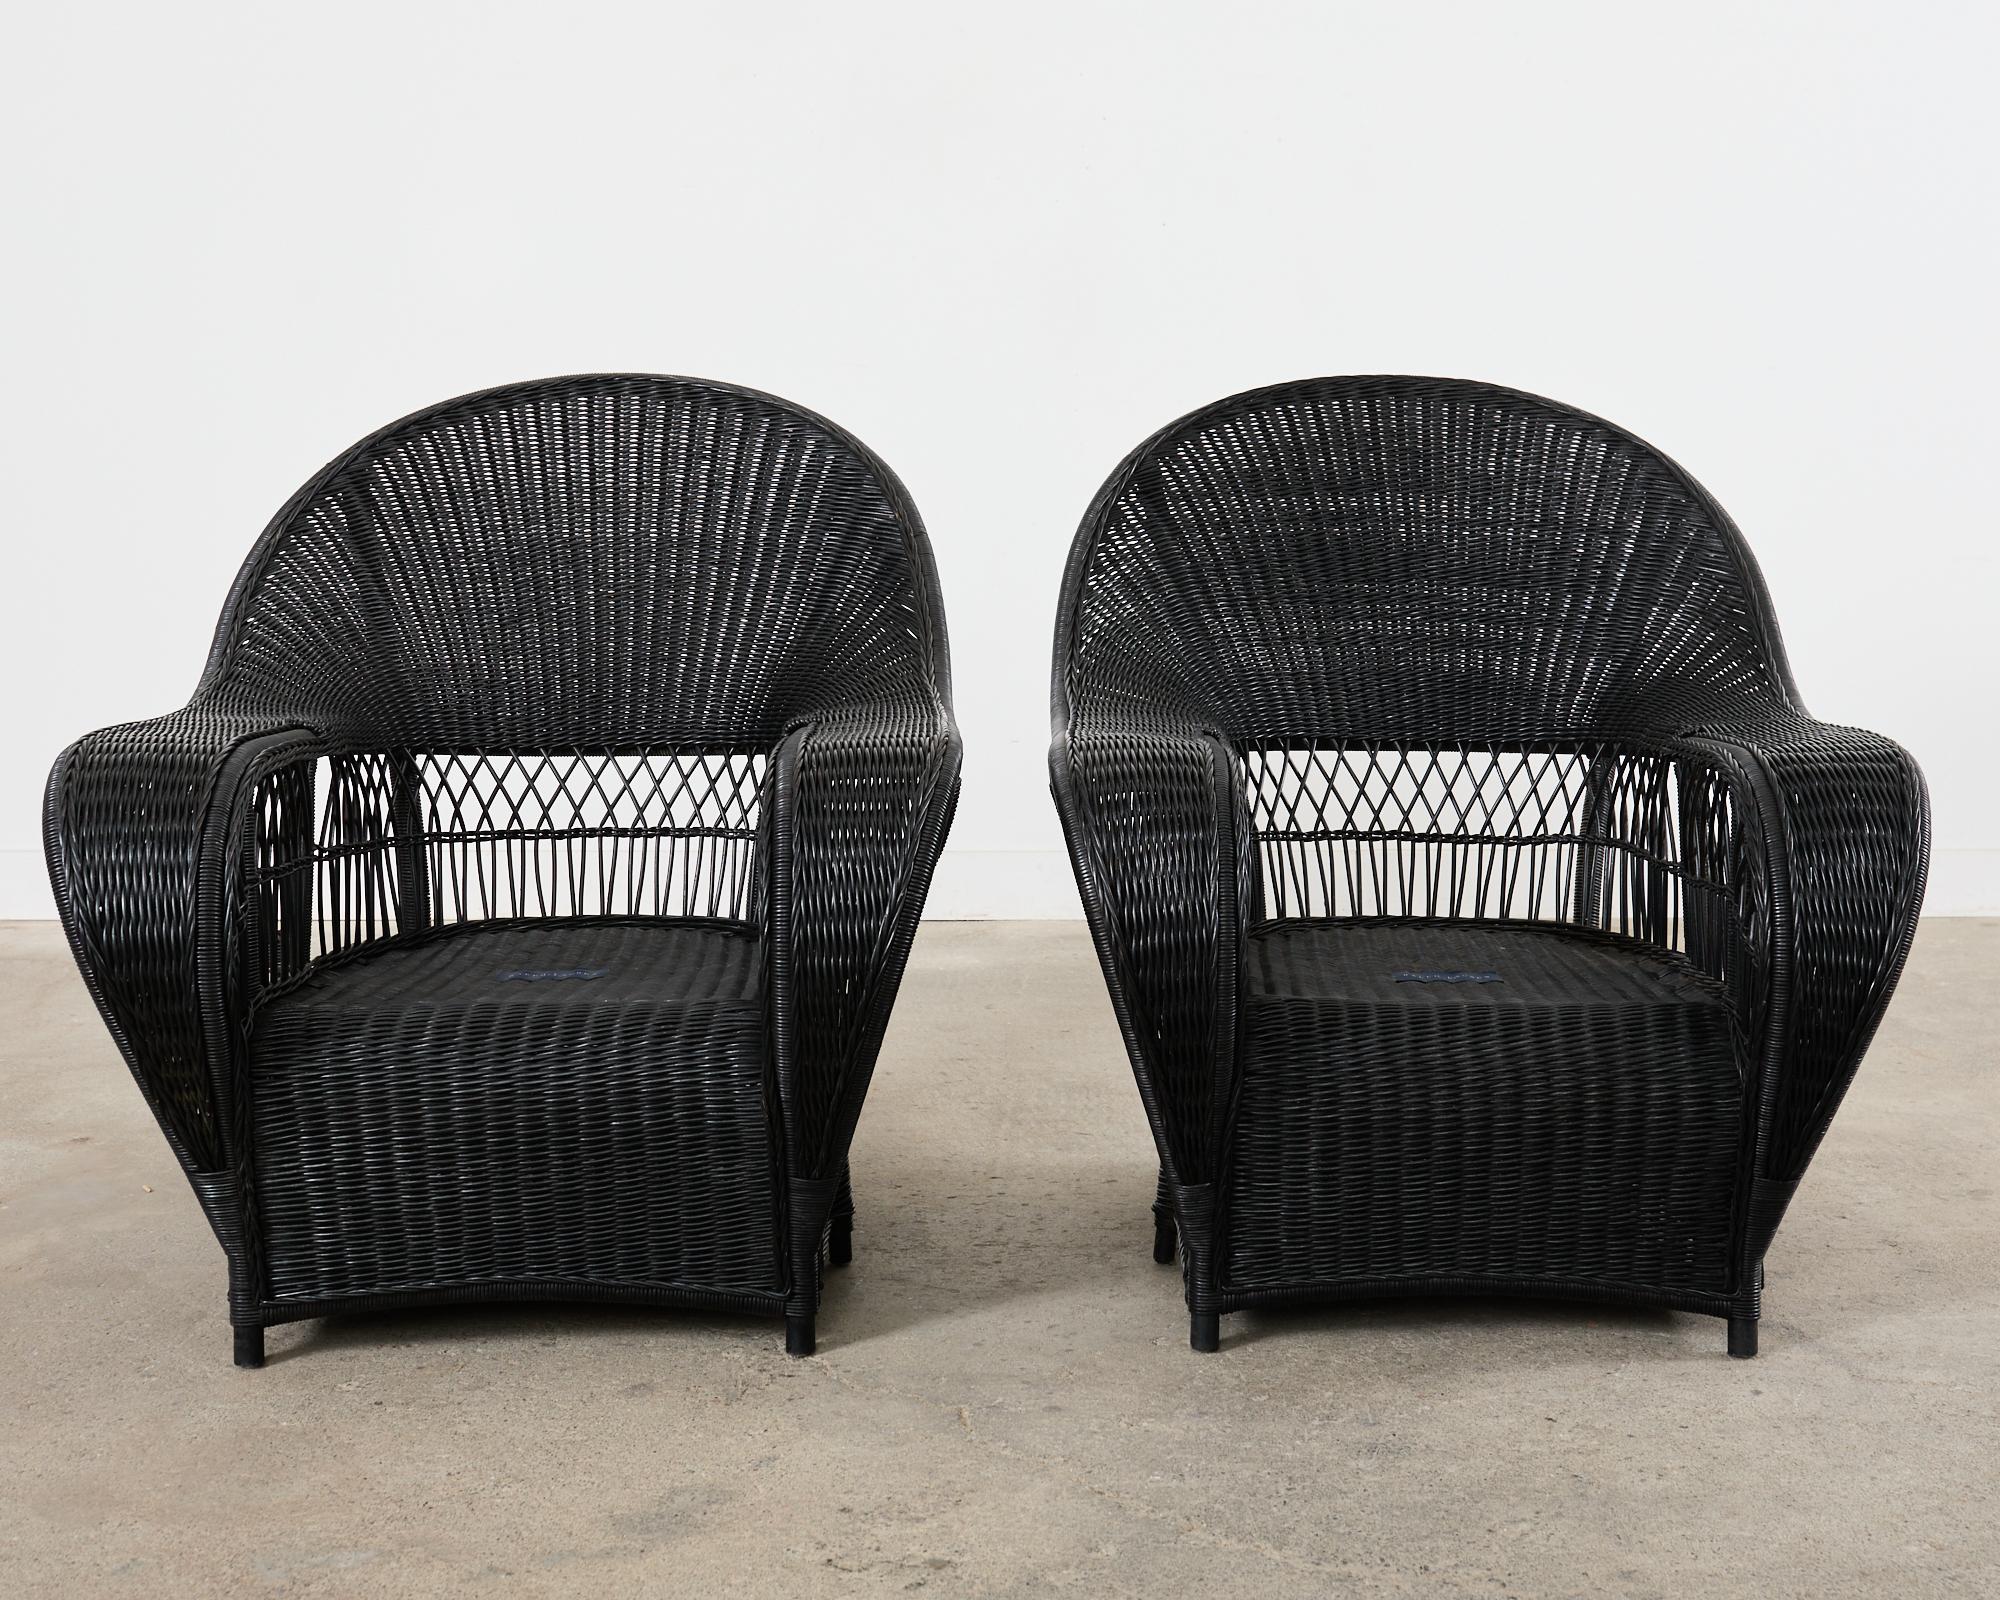 Dramatic pair of ebonized wicker garden lounge armchairs designed by Ralph Lauren. These rare chairs feature an oversized rattan frame embellished with woven wicker. The gracefully curved frames have thick cobra style for backs and wide arms